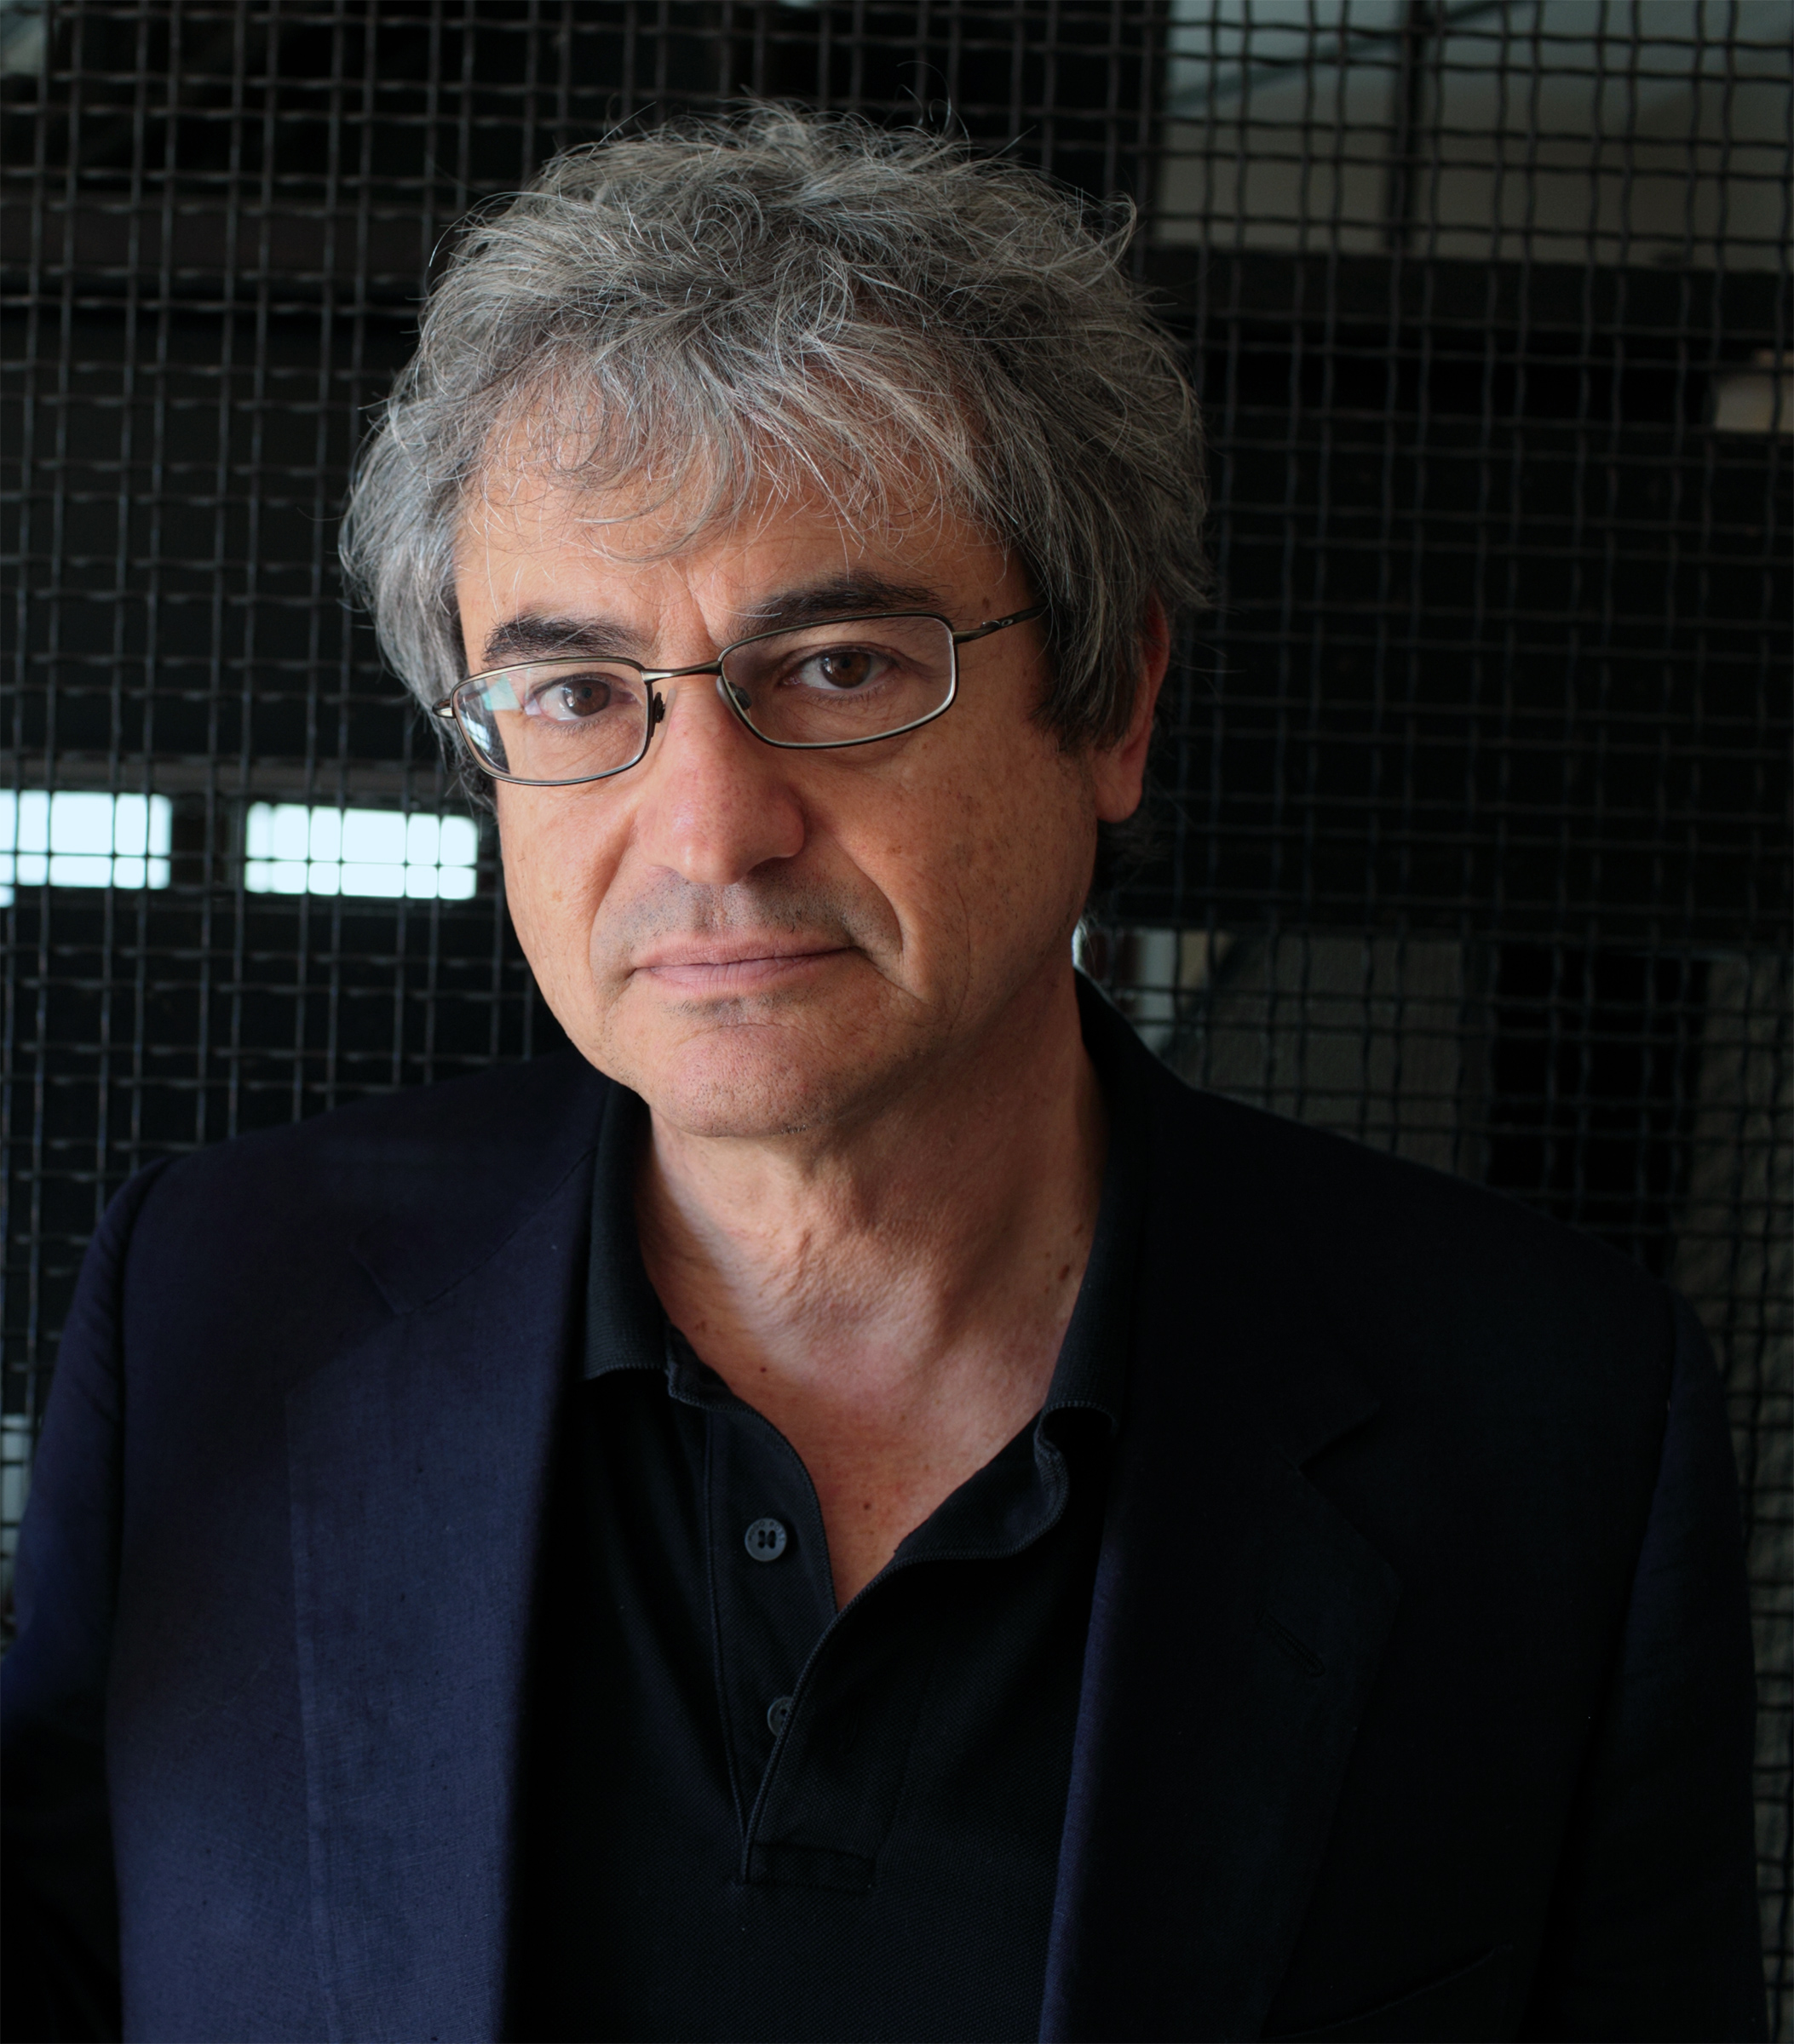 Physicist Carlo Rovelli is preparing to release his latest book, 'There Are Places in the World Where Rules Are Less Important Than Kindness' (Basso Cannarsa)